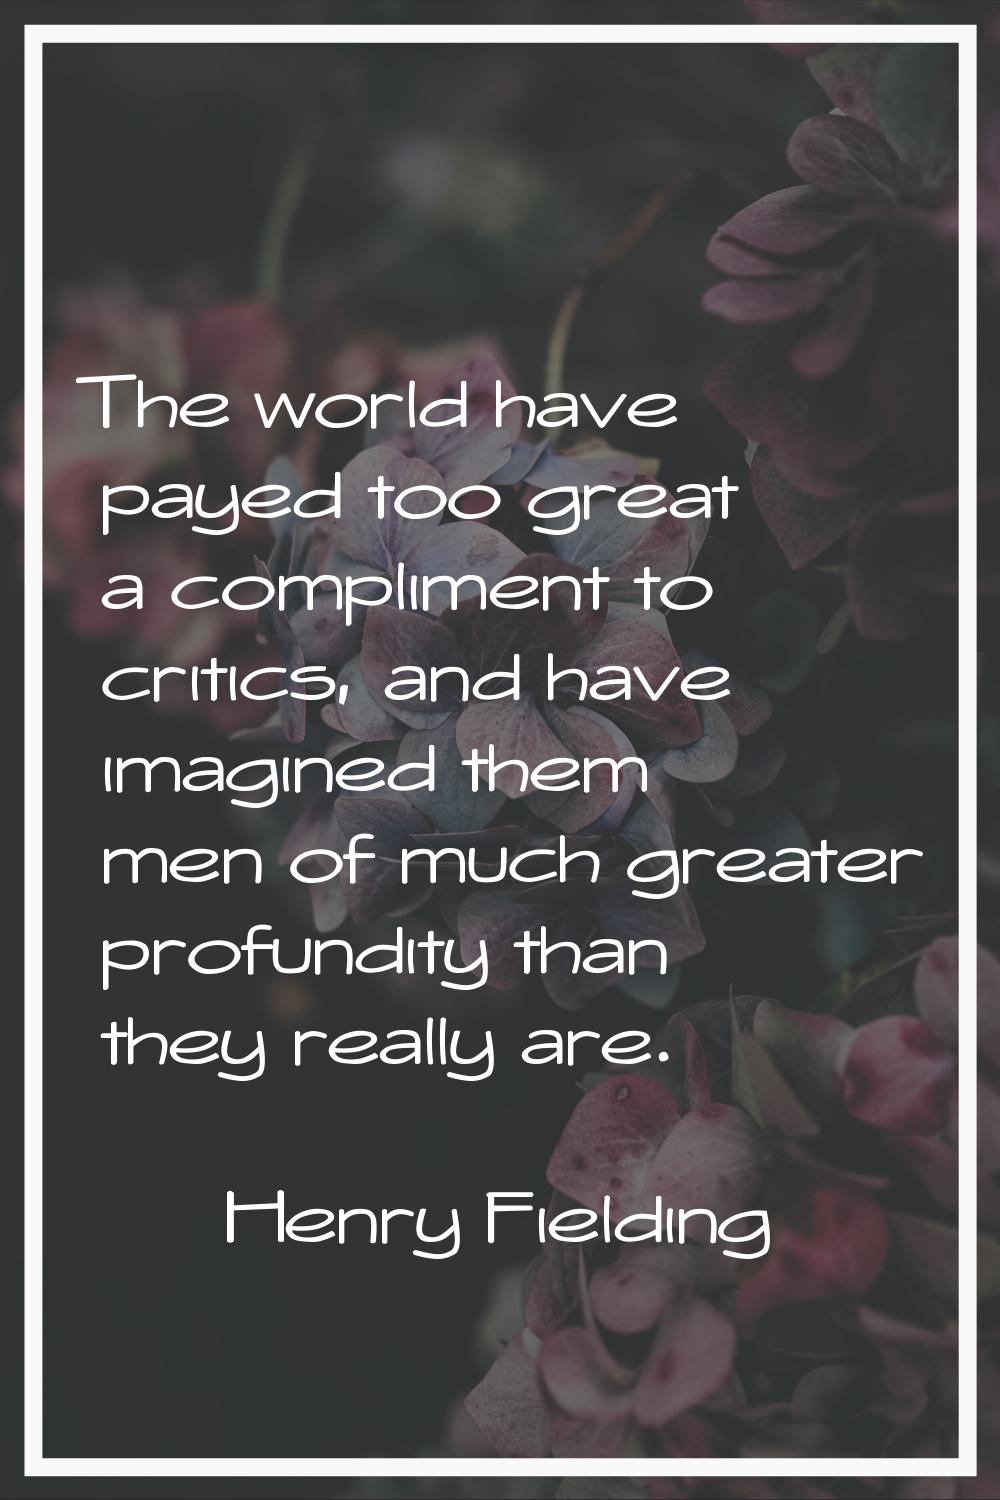 The world have payed too great a compliment to critics, and have imagined them men of much greater 